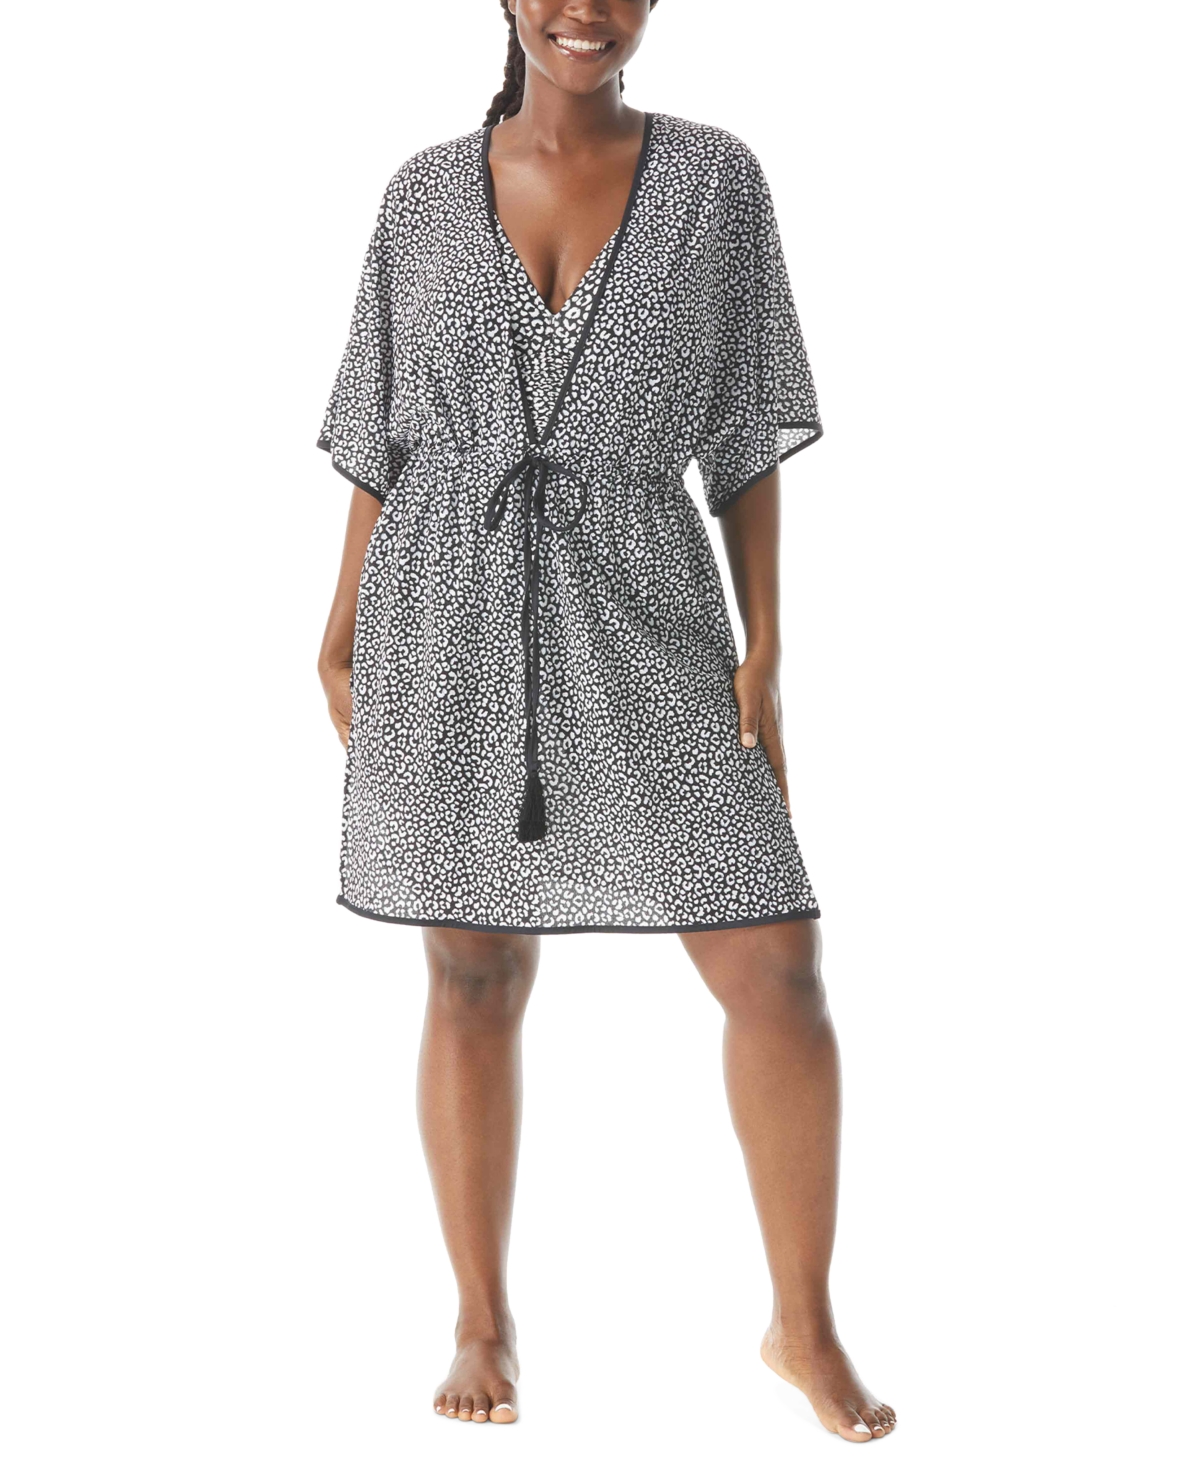 Coco Reef Womens Caftan Swimsuit Cover Up